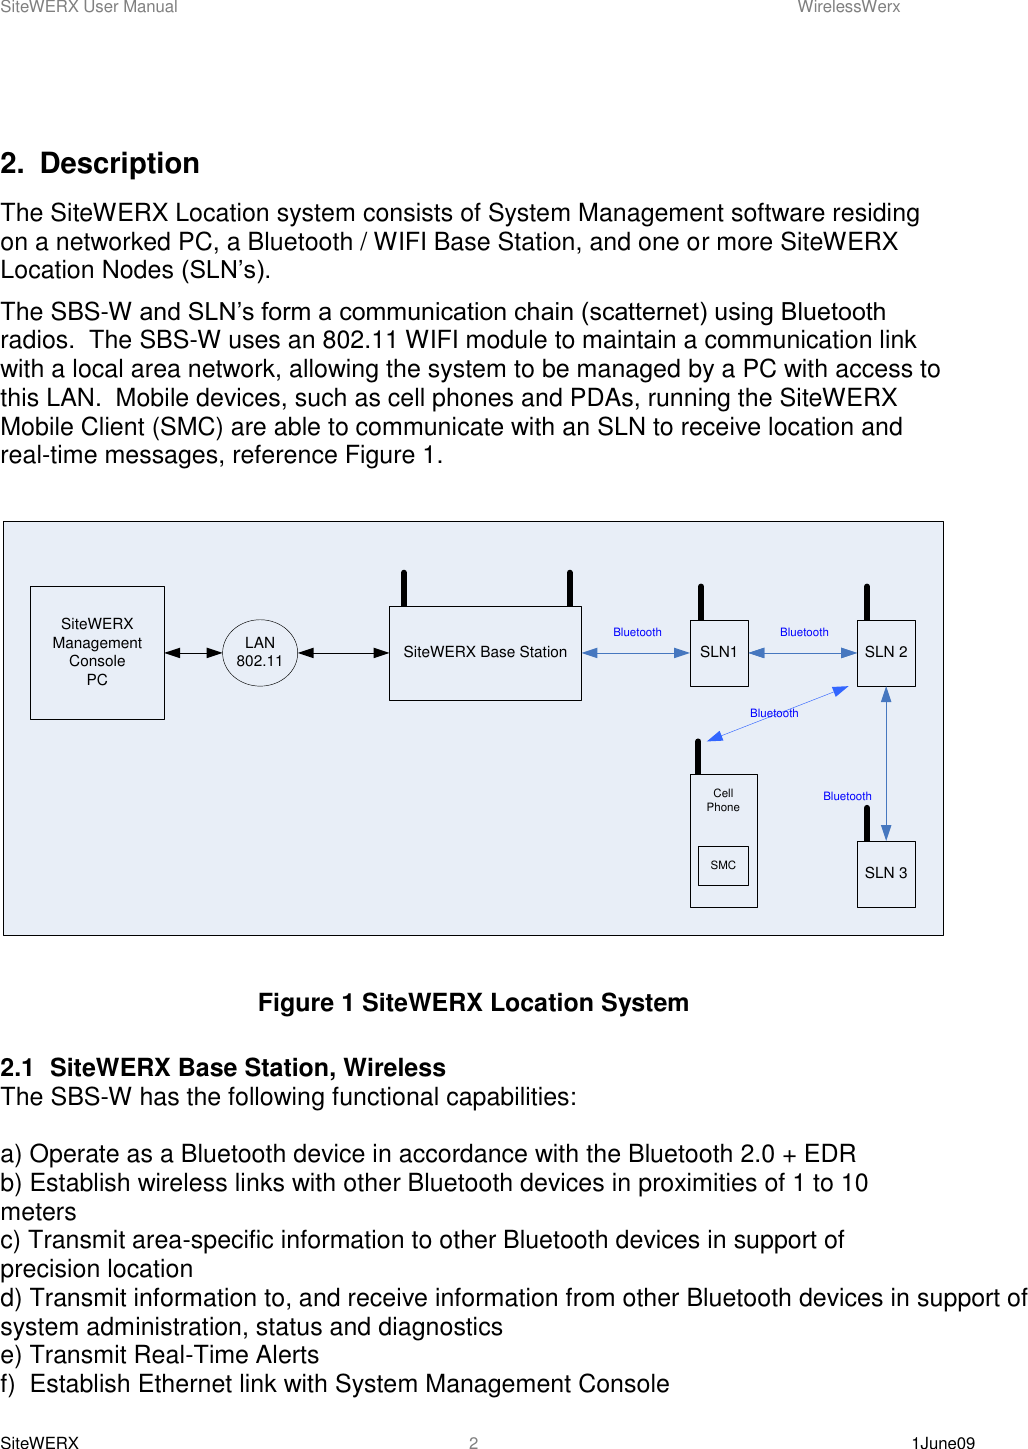 SiteWERX User Manual    WirelessWerx SiteWERX    1June09  2  2.  Description The SiteWERX Location system consists of System Management software residing on a networked PC, a Bluetooth / WIFI Base Station, and one or more SiteWERX Location Nodes (SLN’s). The SBS-W and SLN’s form a communication chain (scatternet) using Bluetooth radios.  The SBS-W uses an 802.11 WIFI module to maintain a communication link with a local area network, allowing the system to be managed by a PC with access to this LAN.  Mobile devices, such as cell phones and PDAs, running the SiteWERX Mobile Client (SMC) are able to communicate with an SLN to receive location and real-time messages, reference Figure 1.  SiteWERX Management ConsolePCLAN802.11 SiteWERX Base Station SLN1Bluetooth BluetoothSLN 2SLN 3BluetoothCell PhoneSMCBluetooth  Figure 1 SiteWERX Location System  2.1  SiteWERX Base Station, Wireless The SBS-W has the following functional capabilities:  a) Operate as a Bluetooth device in accordance with the Bluetooth 2.0 + EDR b) Establish wireless links with other Bluetooth devices in proximities of 1 to 10 meters c) Transmit area-specific information to other Bluetooth devices in support of precision location d) Transmit information to, and receive information from other Bluetooth devices in support of system administration, status and diagnostics e) Transmit Real-Time Alerts f)  Establish Ethernet link with System Management Console 